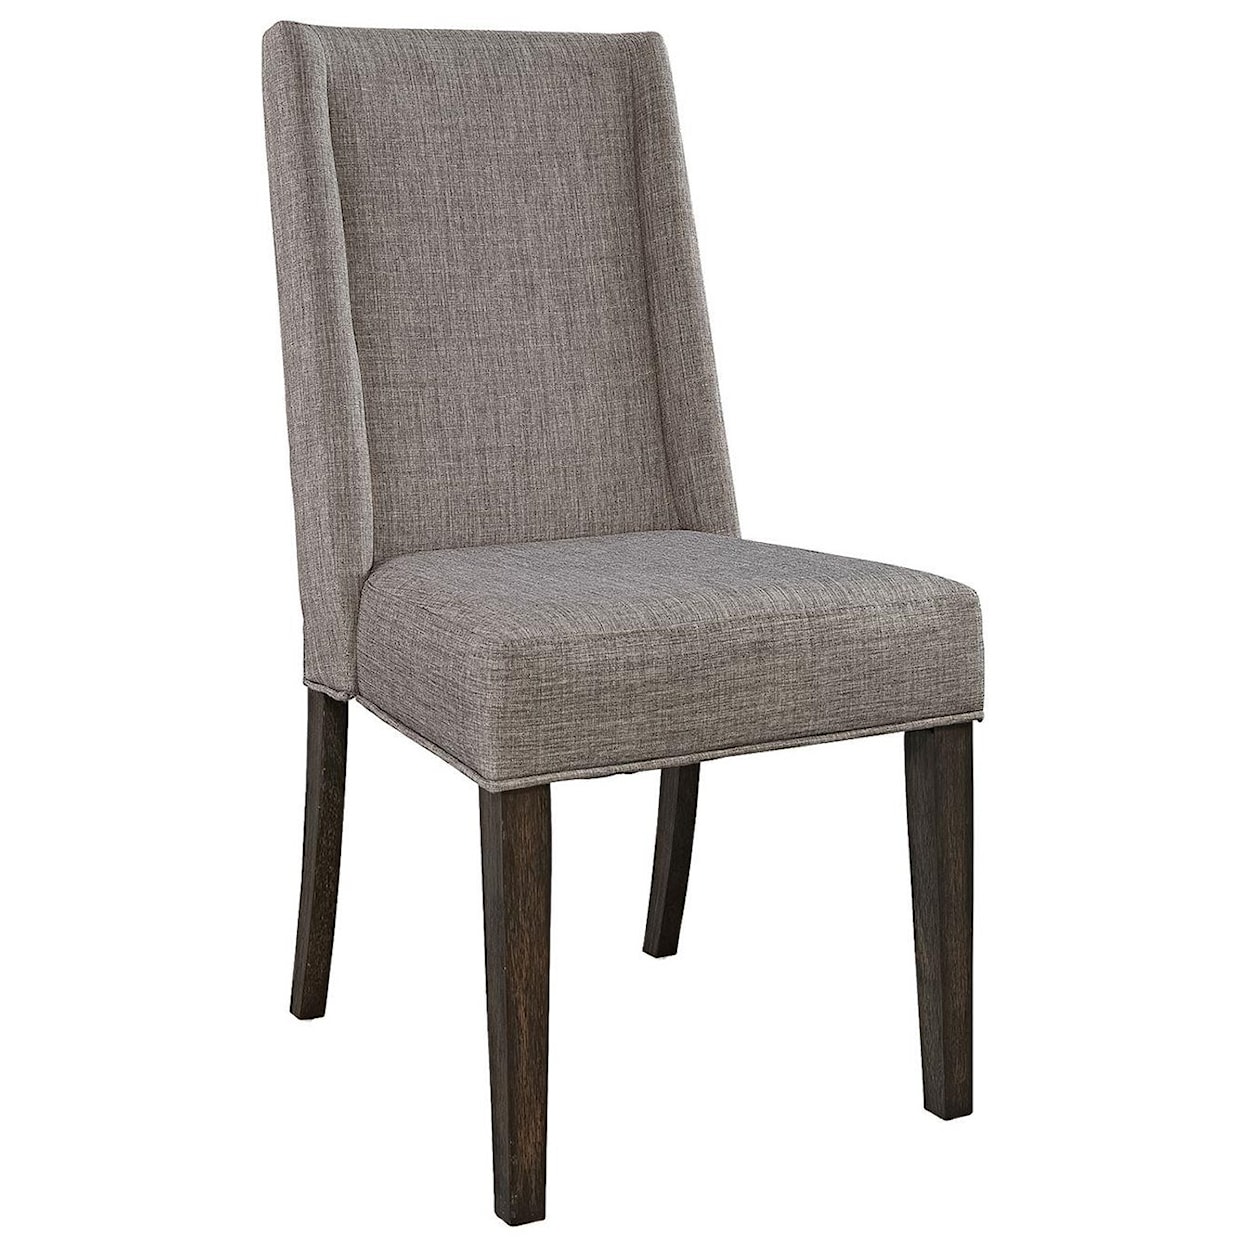 Freedom Furniture Double Bridge Upholstered Dining Side Chair